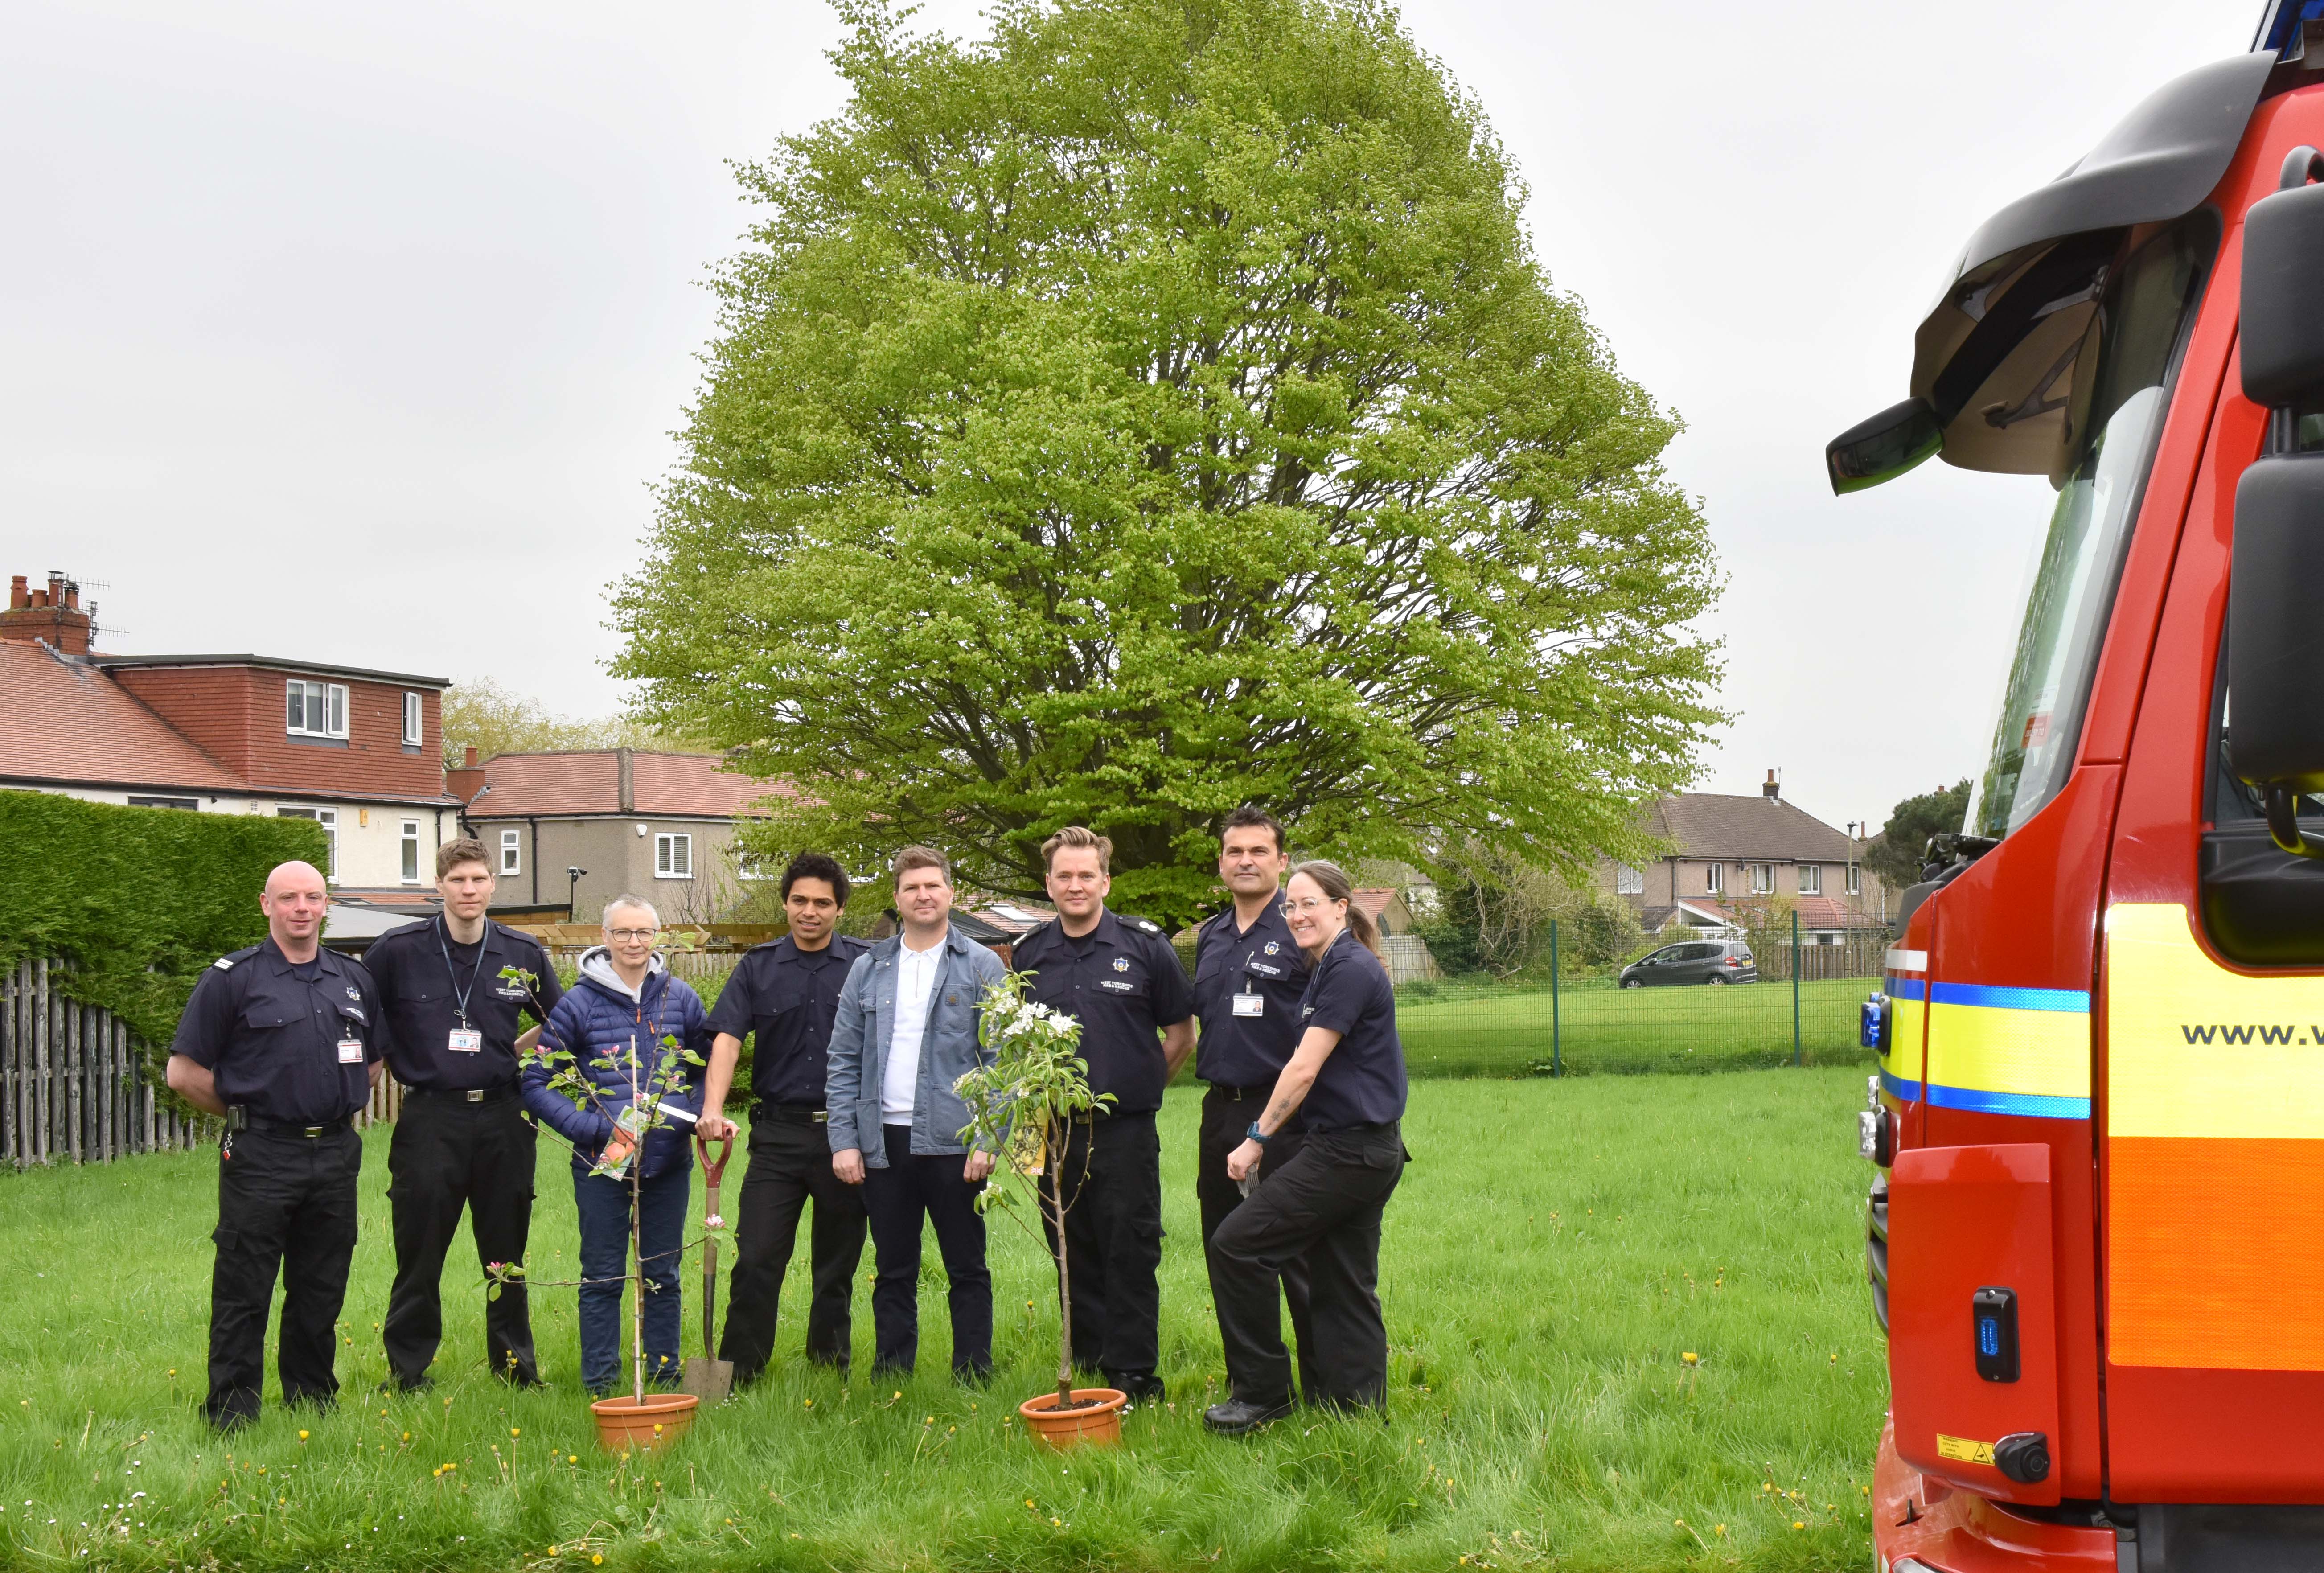 Ilkley Fire Station launches fundraising for orchard